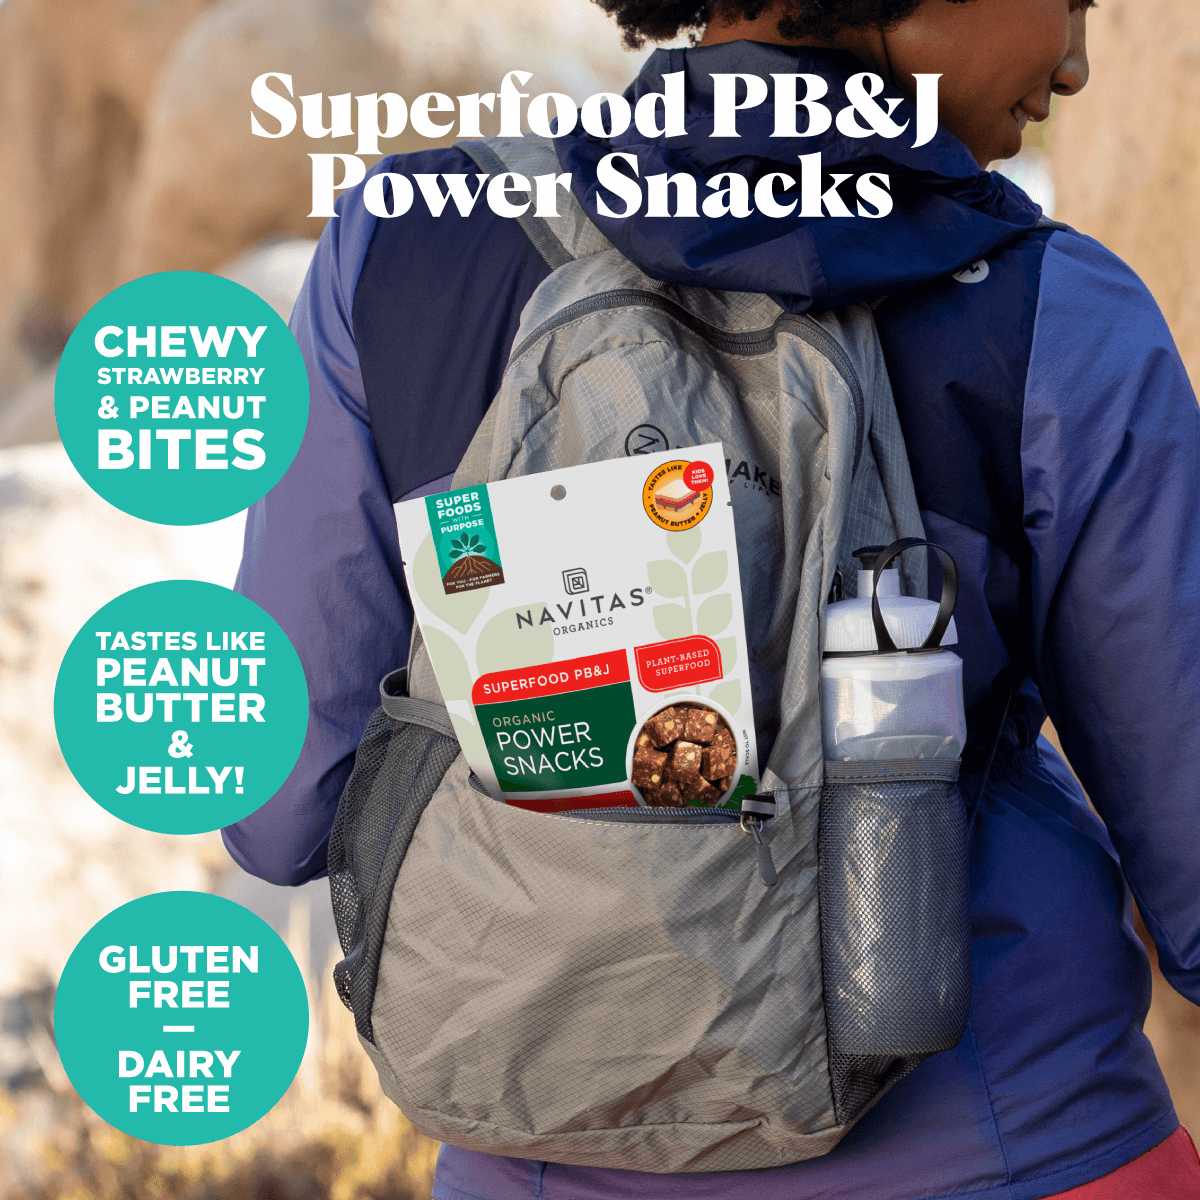 Navitas Organics Superfood PB&J Power Snacks are chewy strawberry and peanut bites that taste just like peanut butter and jelly. They're gluten-free and dairy-free.